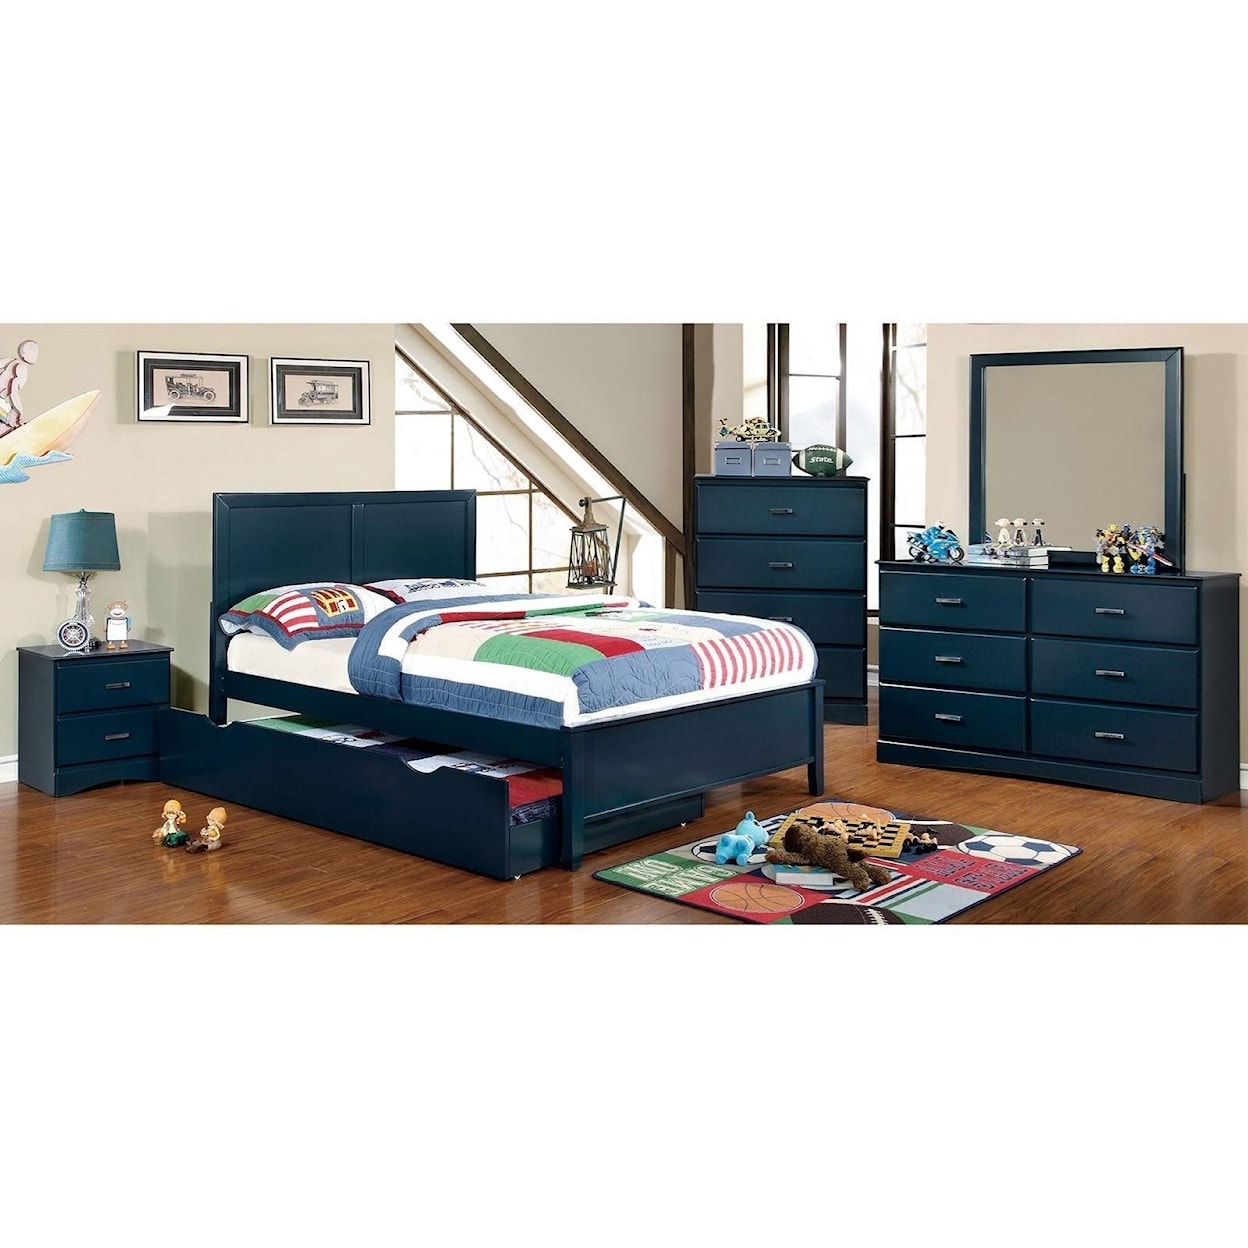 Furniture of America Prismo Twin Bedroom Group